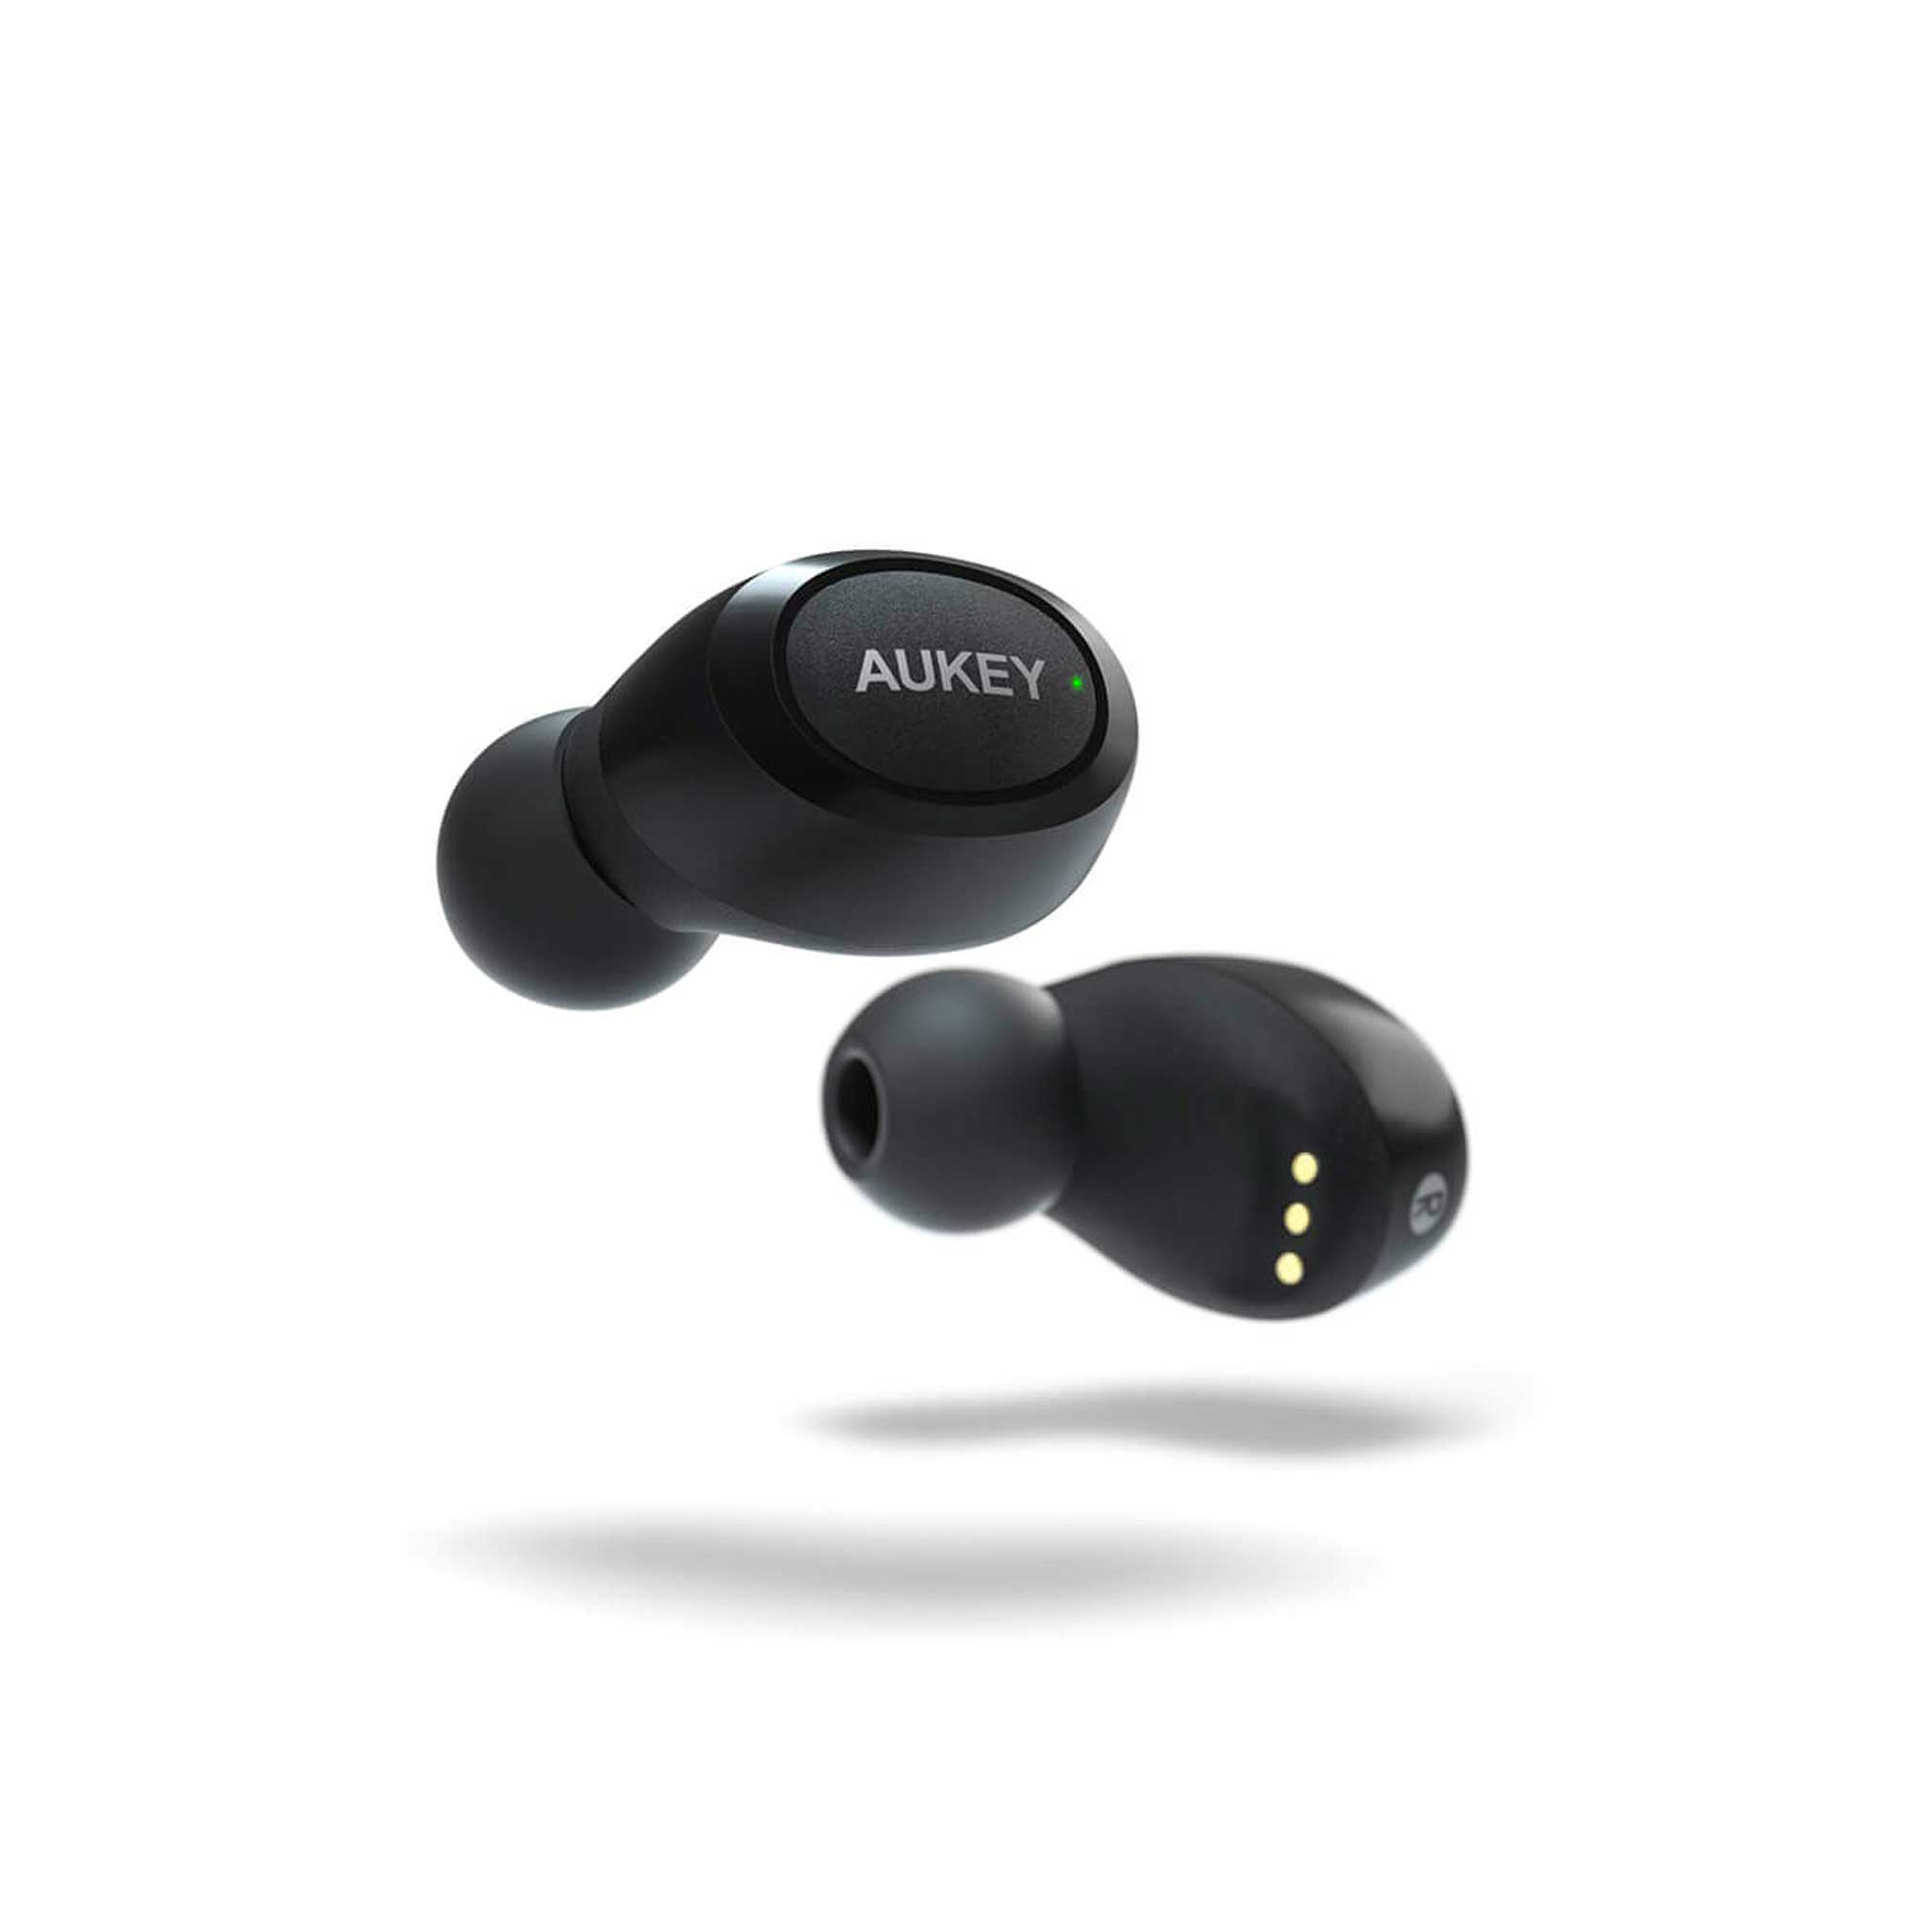 Eartip Earbud Tips Replacement Tips for Aukey Latitude Wireless Earphones Earbud 